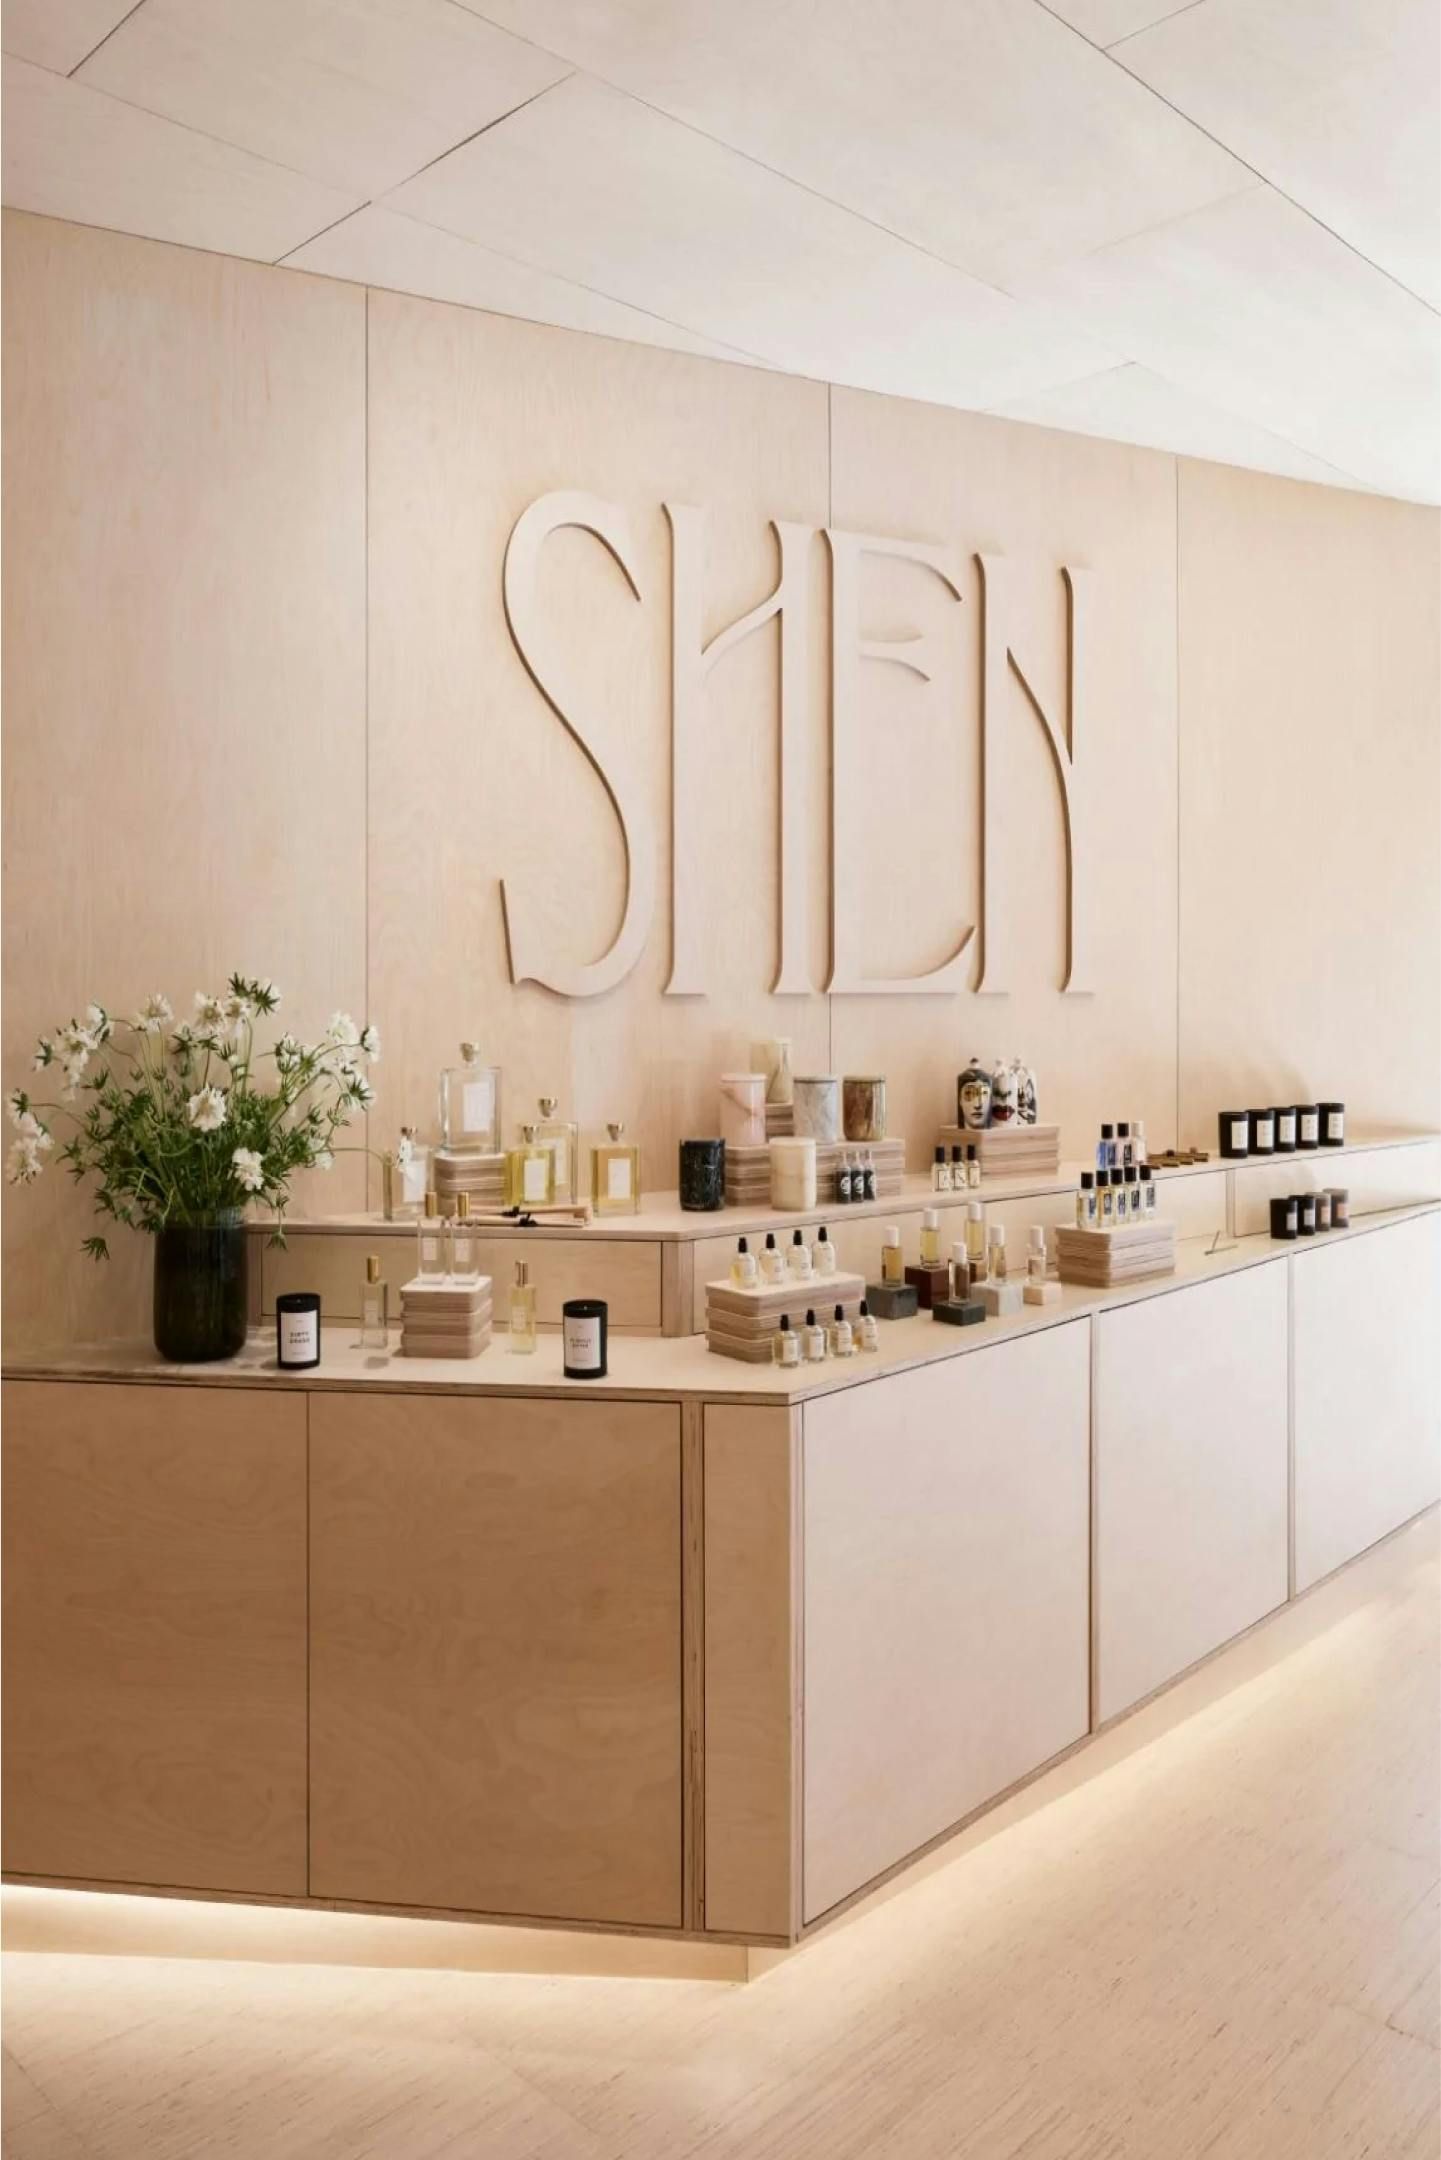 In-store photo of various Shen products, with the Shen logo on the wall